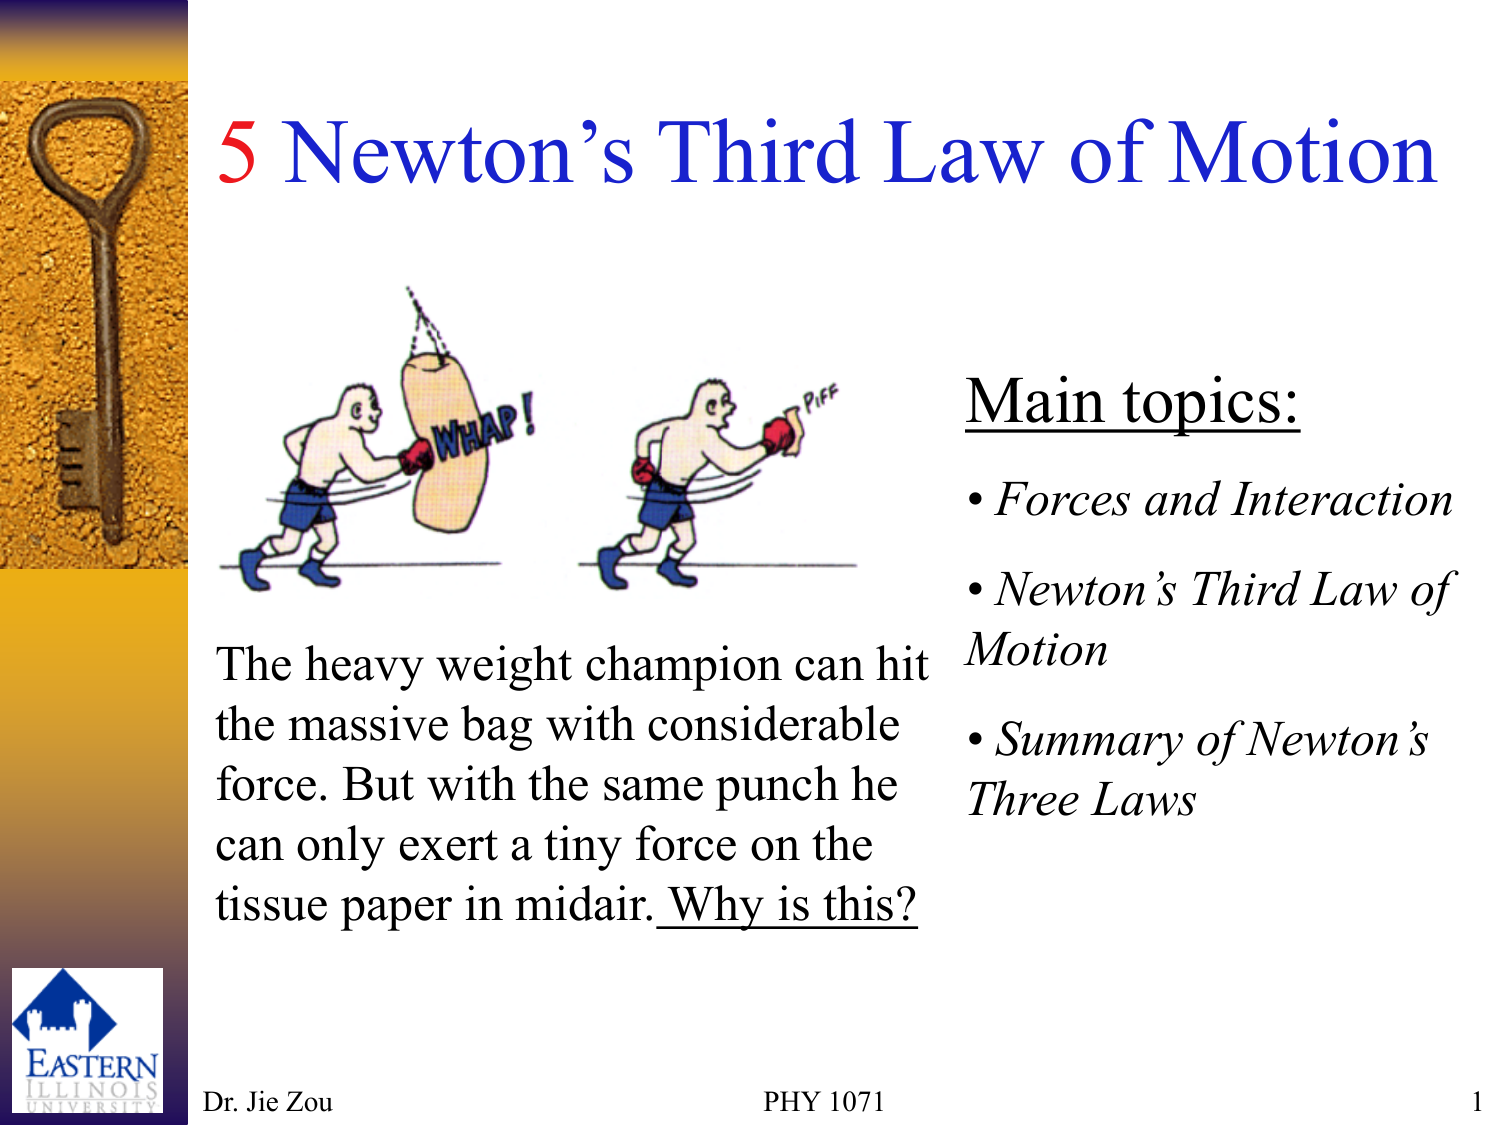 3 laws of motion